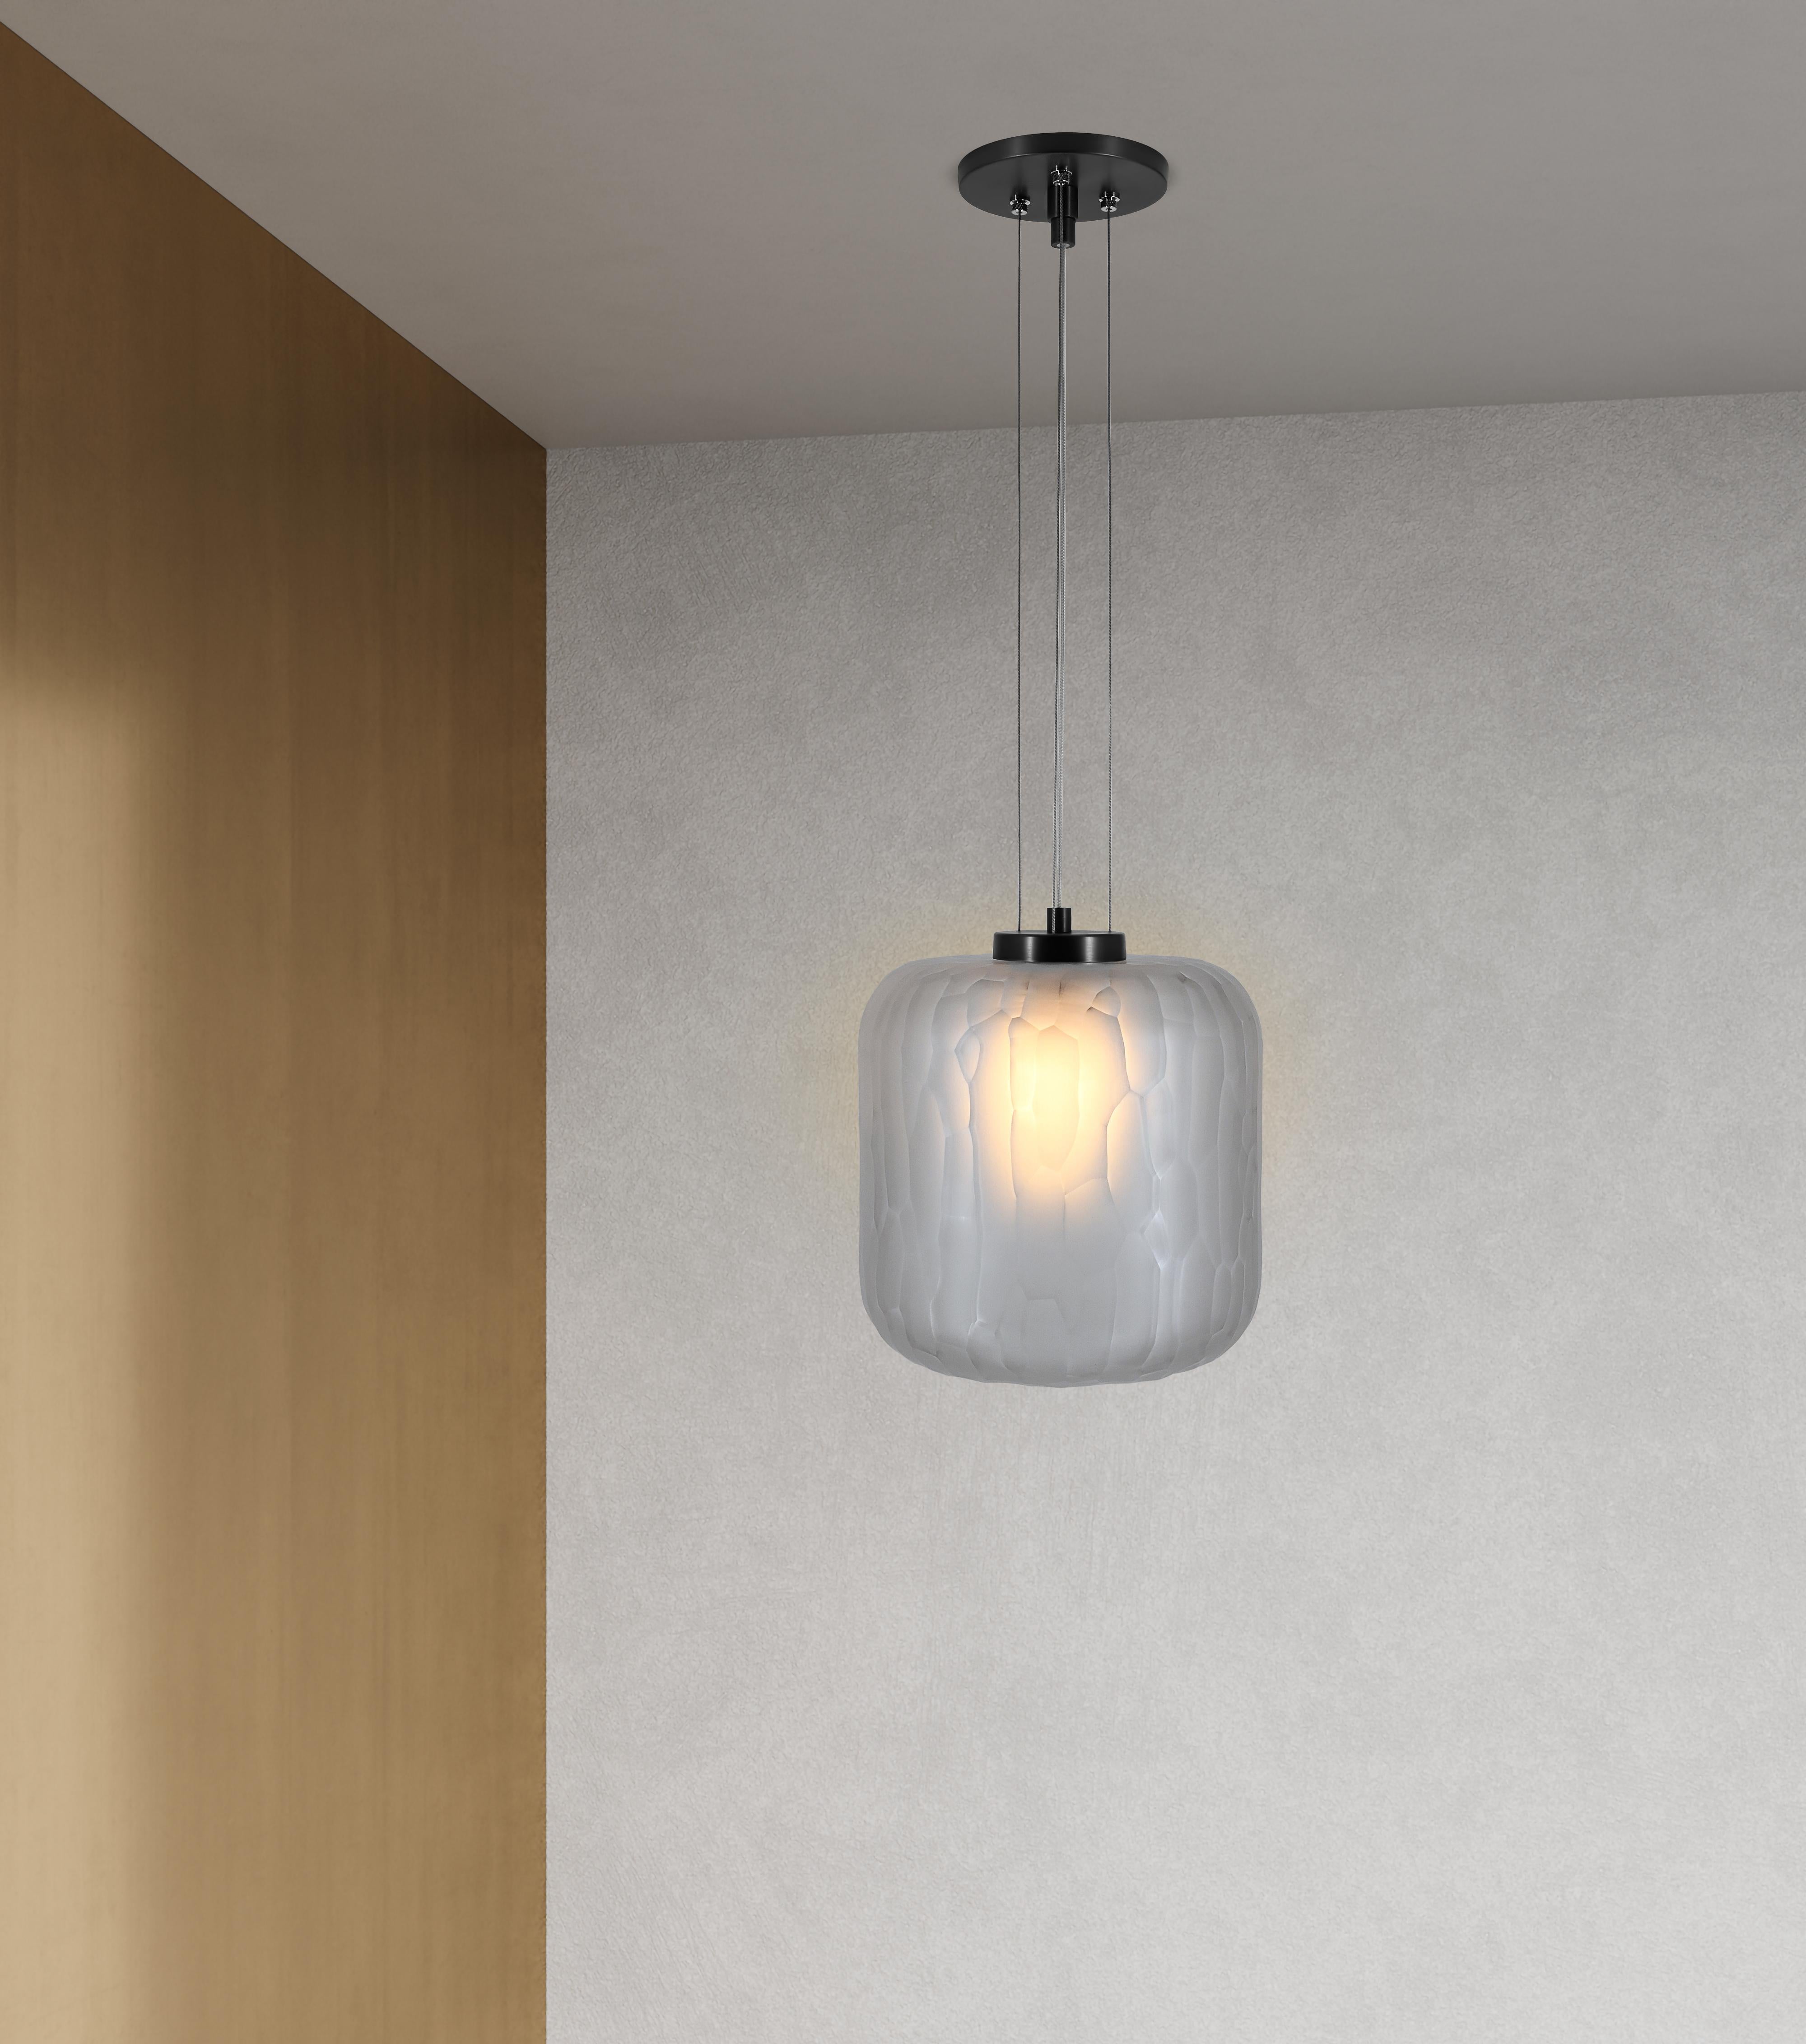 The Shereen Small pendant was designed with the expressive elegance of gemstone jewelry in mind. Bold, rounded contours with frosted, multifaceted surfaces create a remarkably exquisite sculptural piece with a rich, modern touch. Each piece is